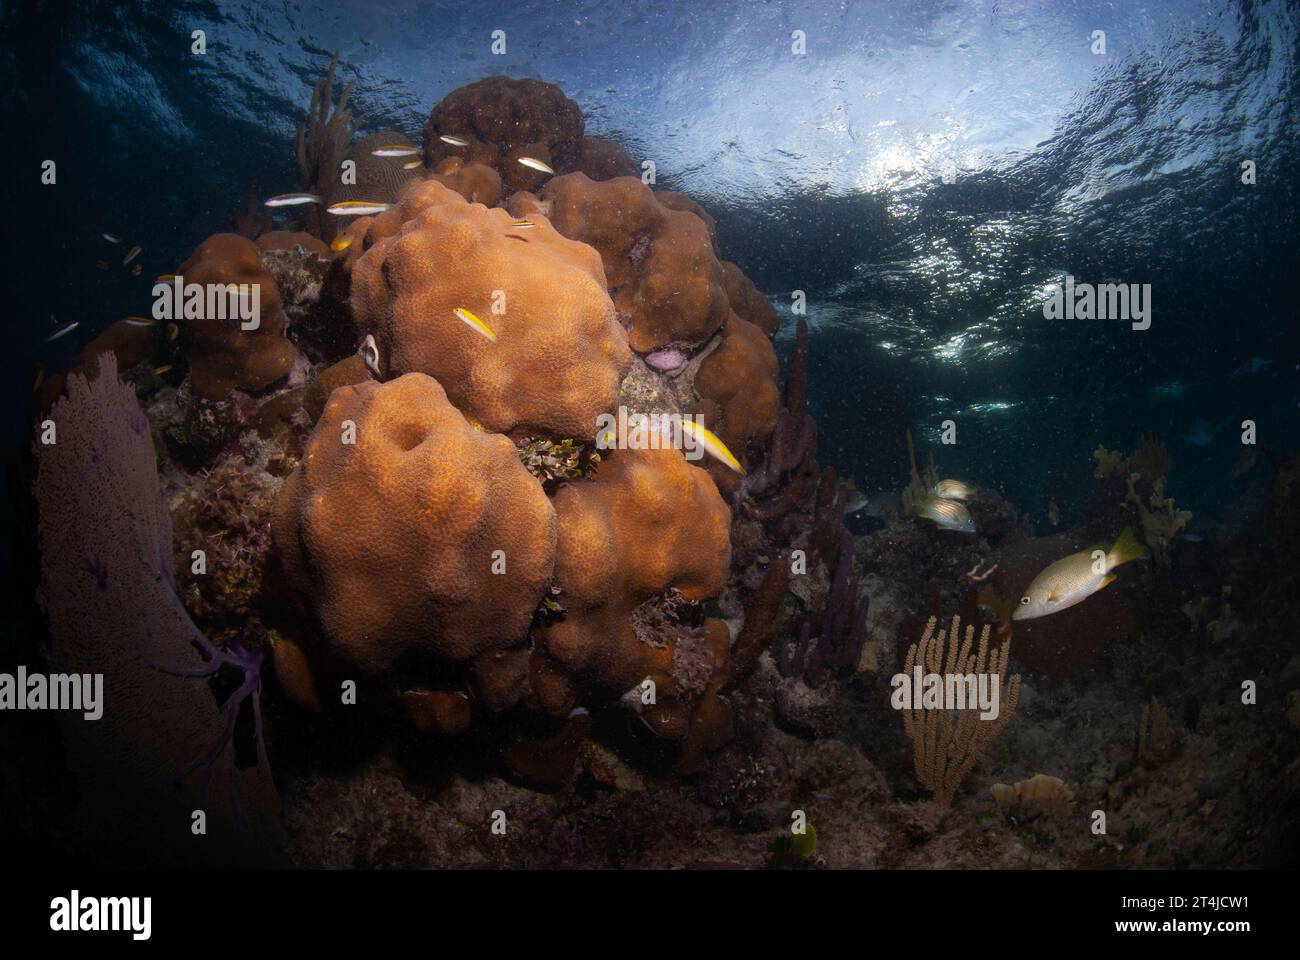 Coral Reef at night Stock Photo